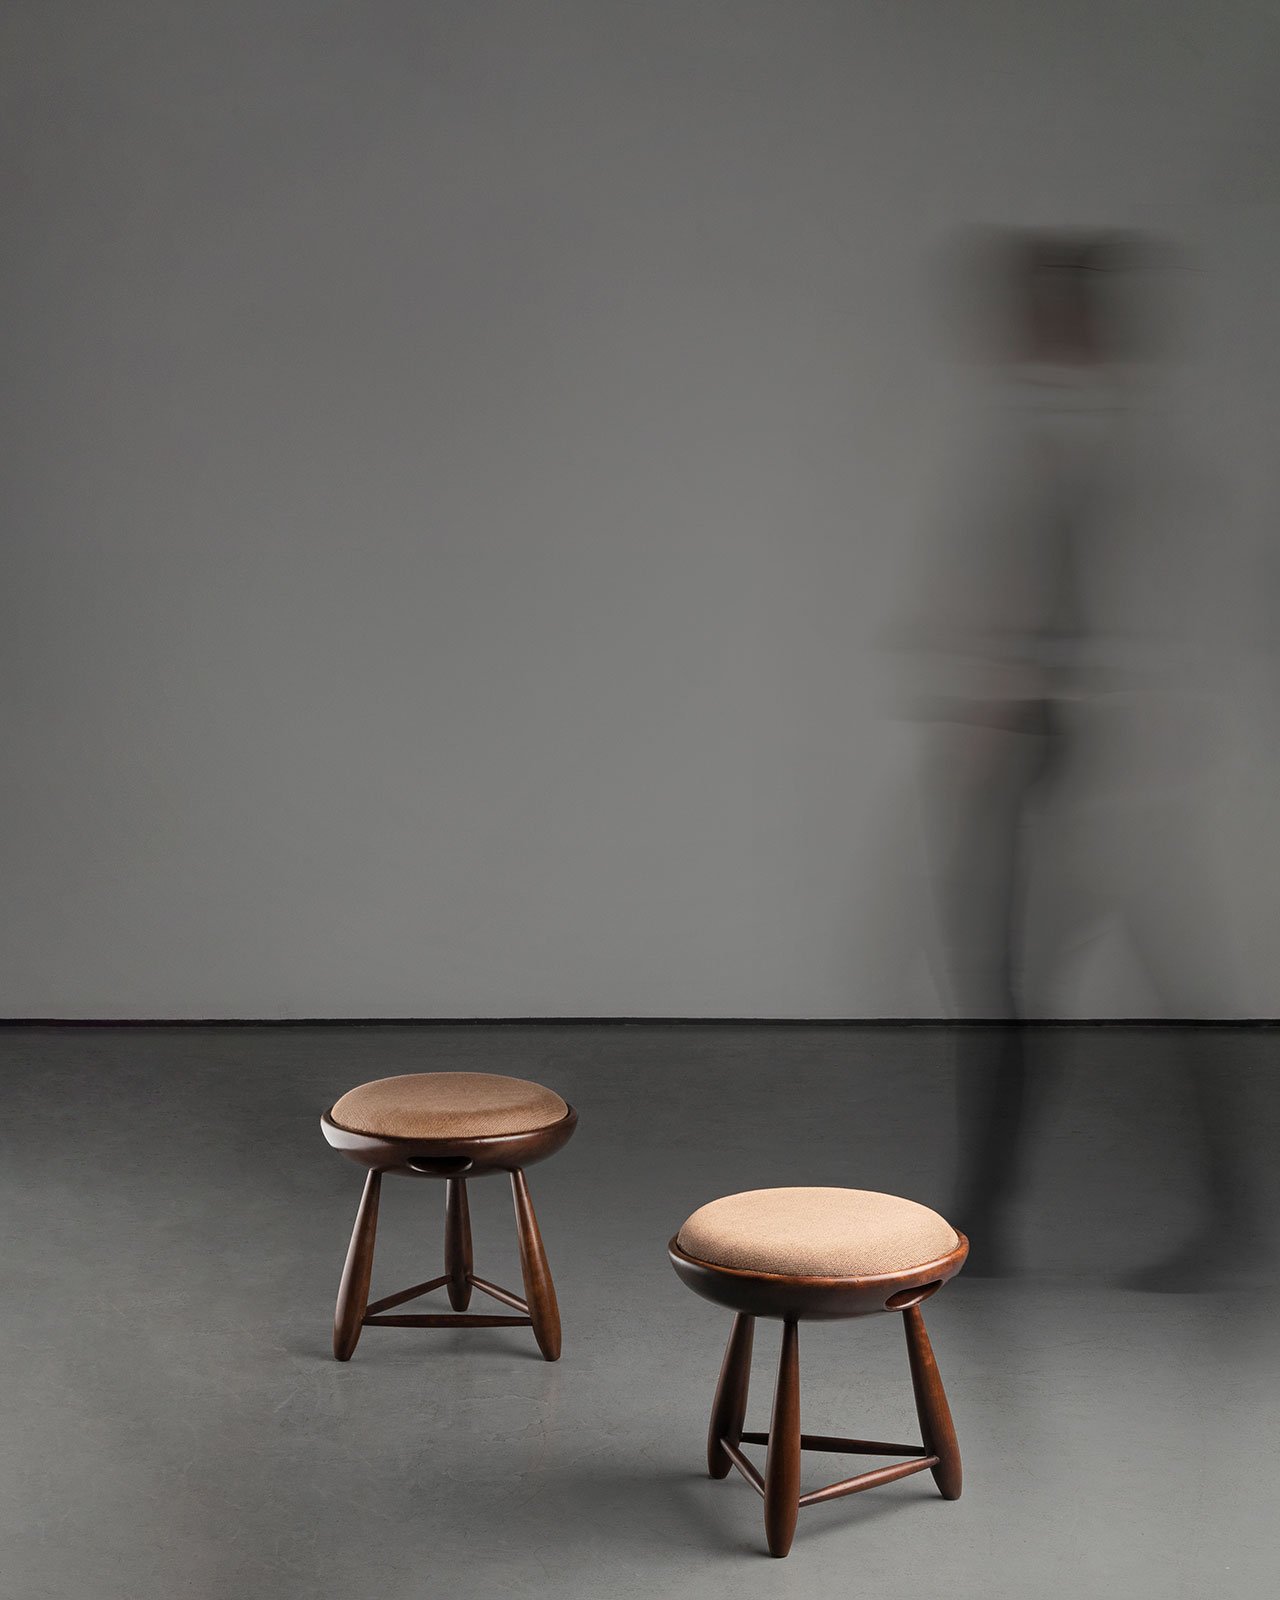 Stools by Sergio Rodrigues. Photography © Carpenters Workshop Gallery.